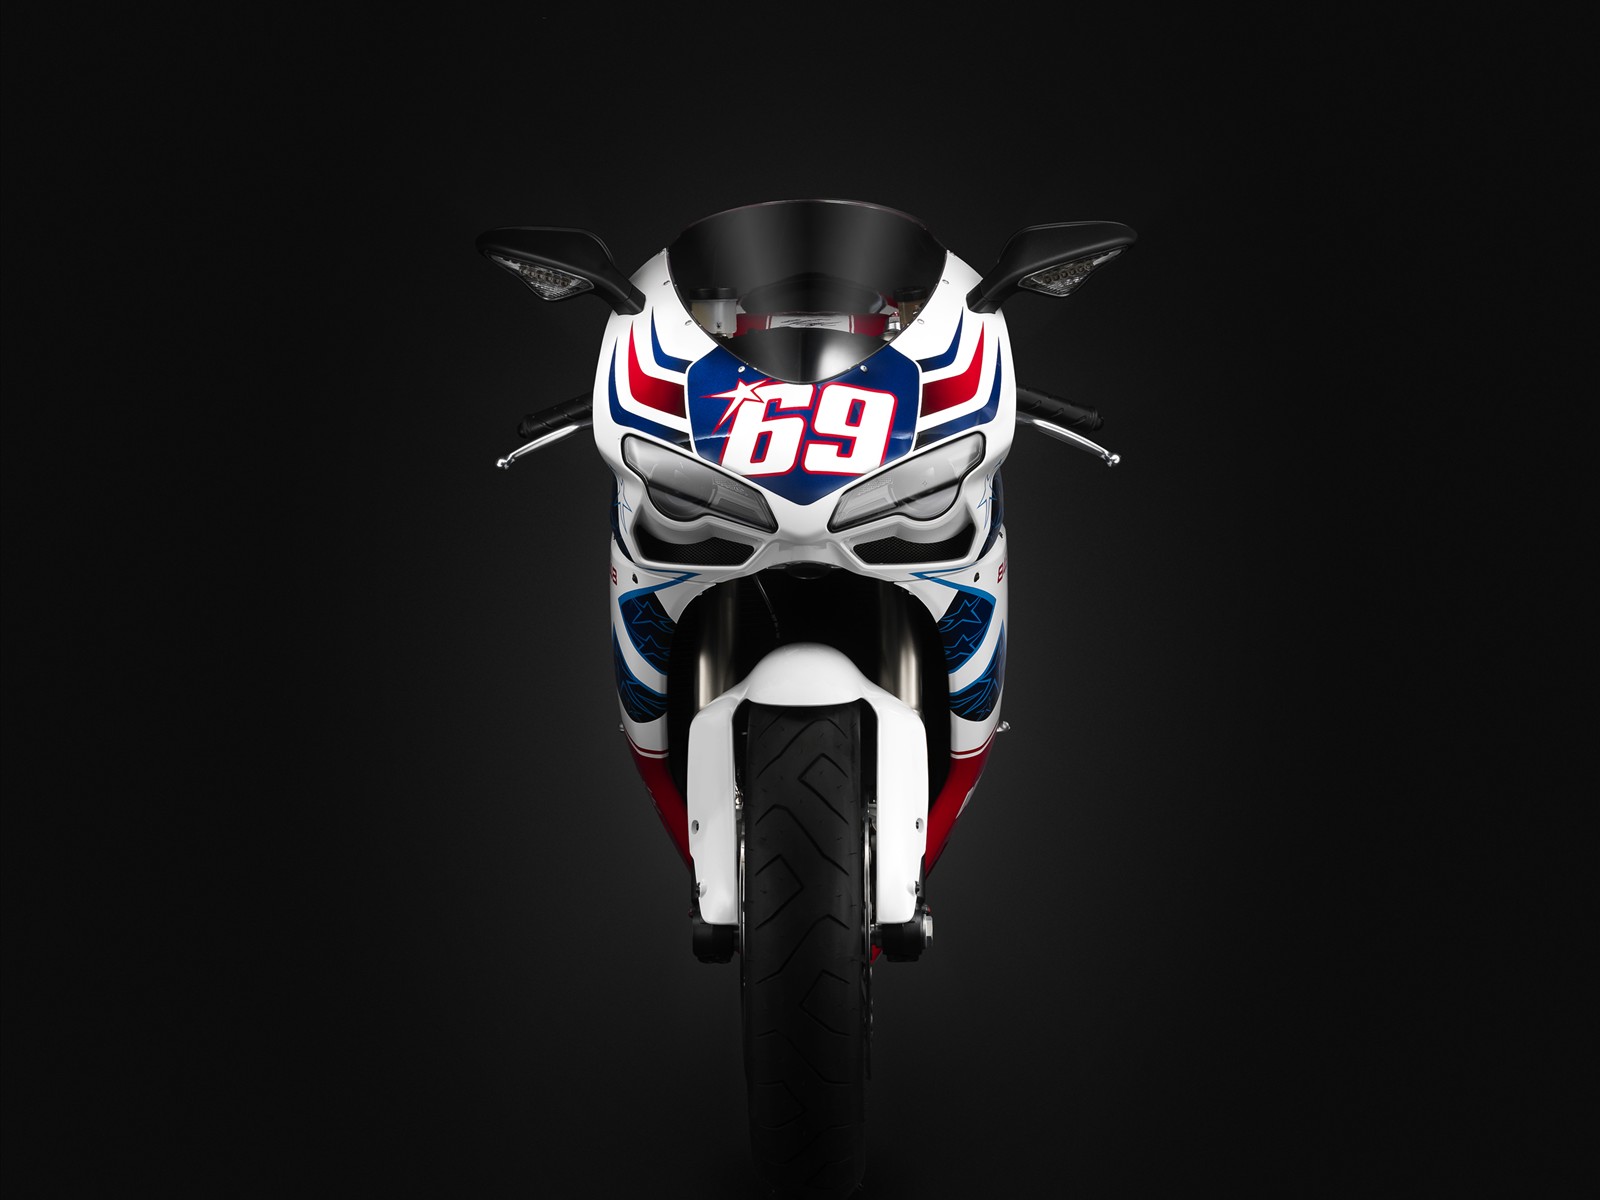 Ducati 848 Nicky Hayden Edition Wallpapers HD Wallpapers